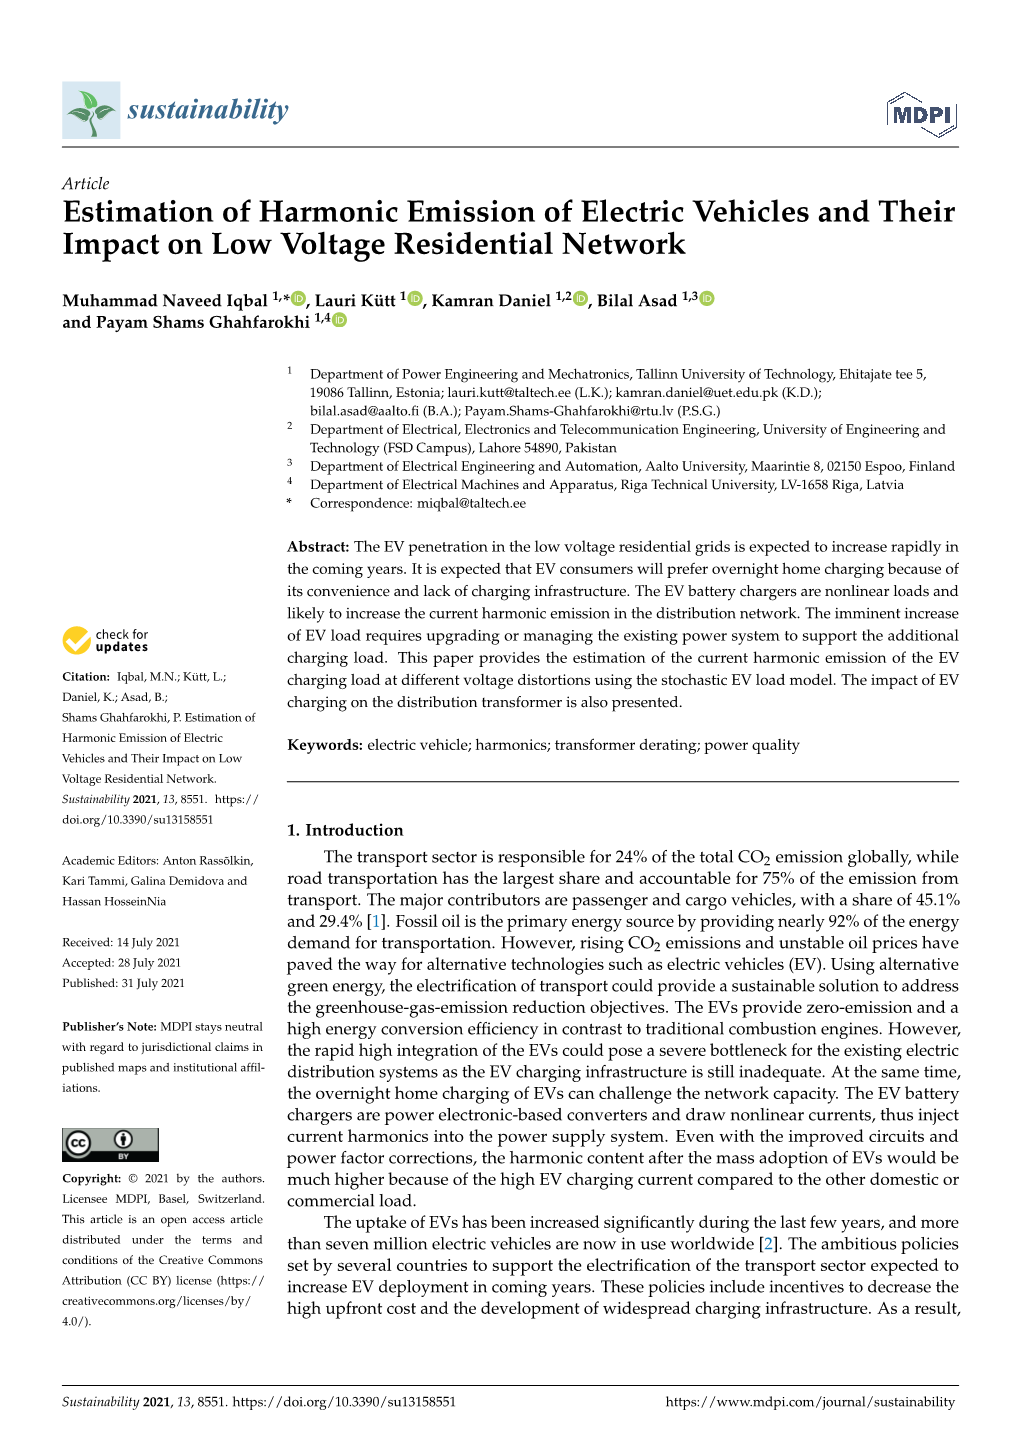 Estimation of Harmonic Emission of Electric Vehicles and Their Impact on Low Voltage Residential Network